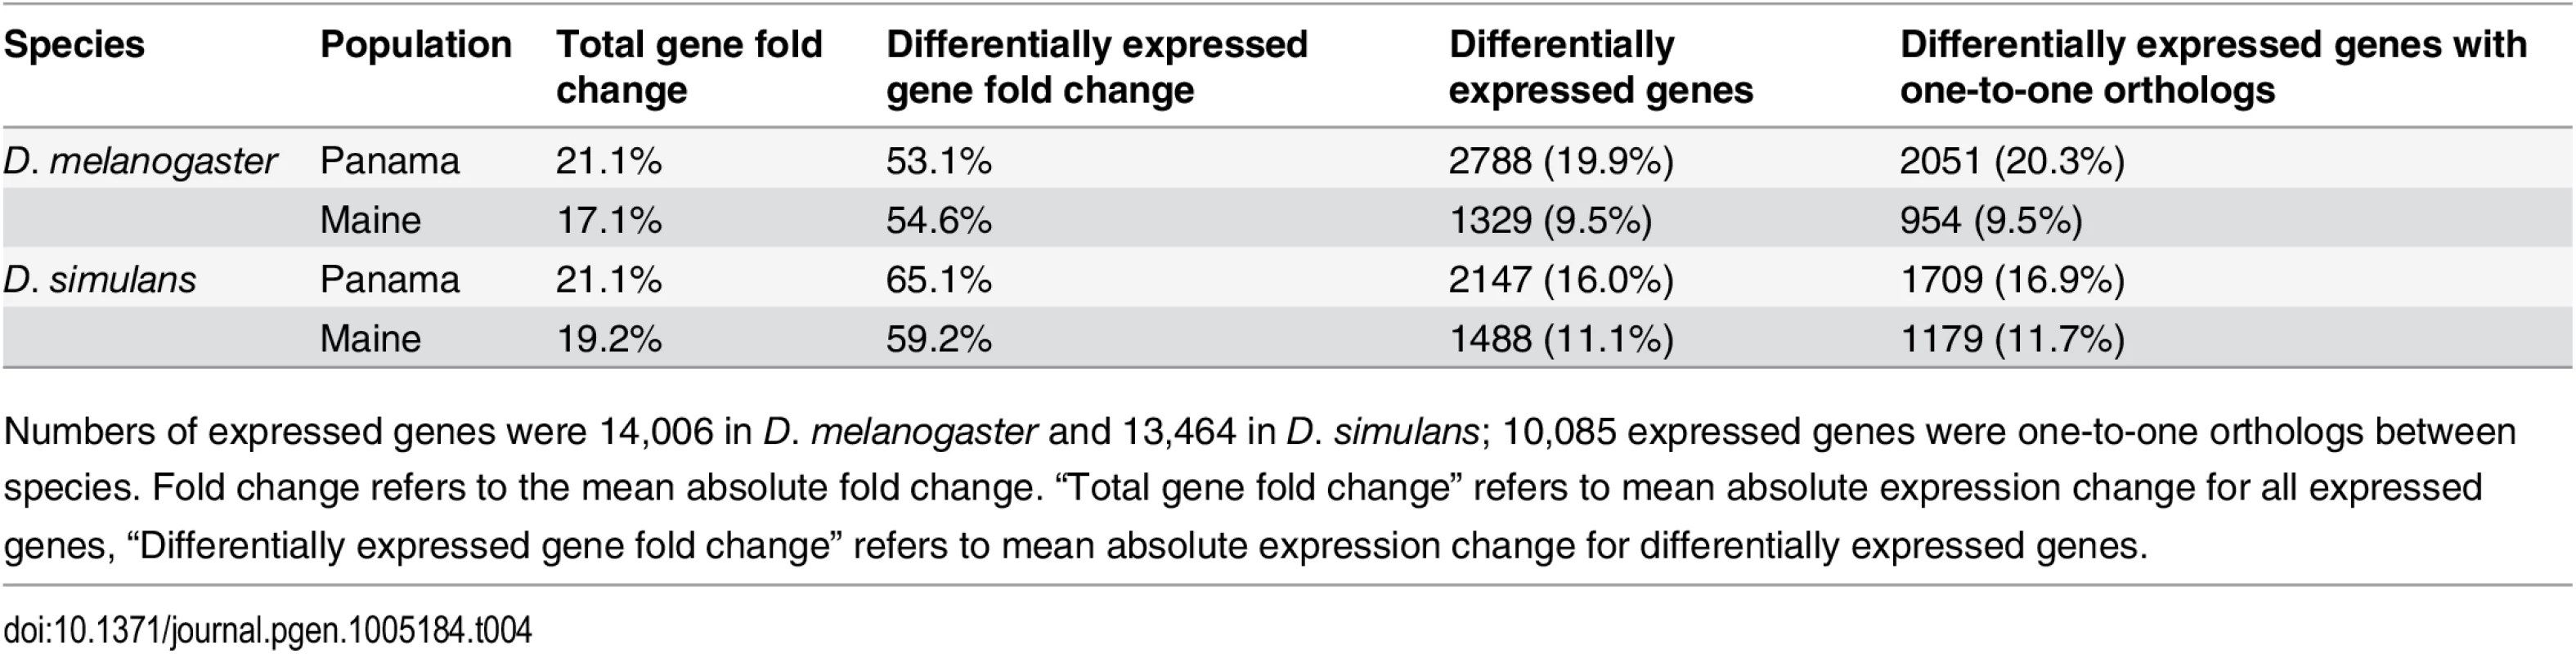 Differential gene expression at 21°C vs. 29°C within populations.